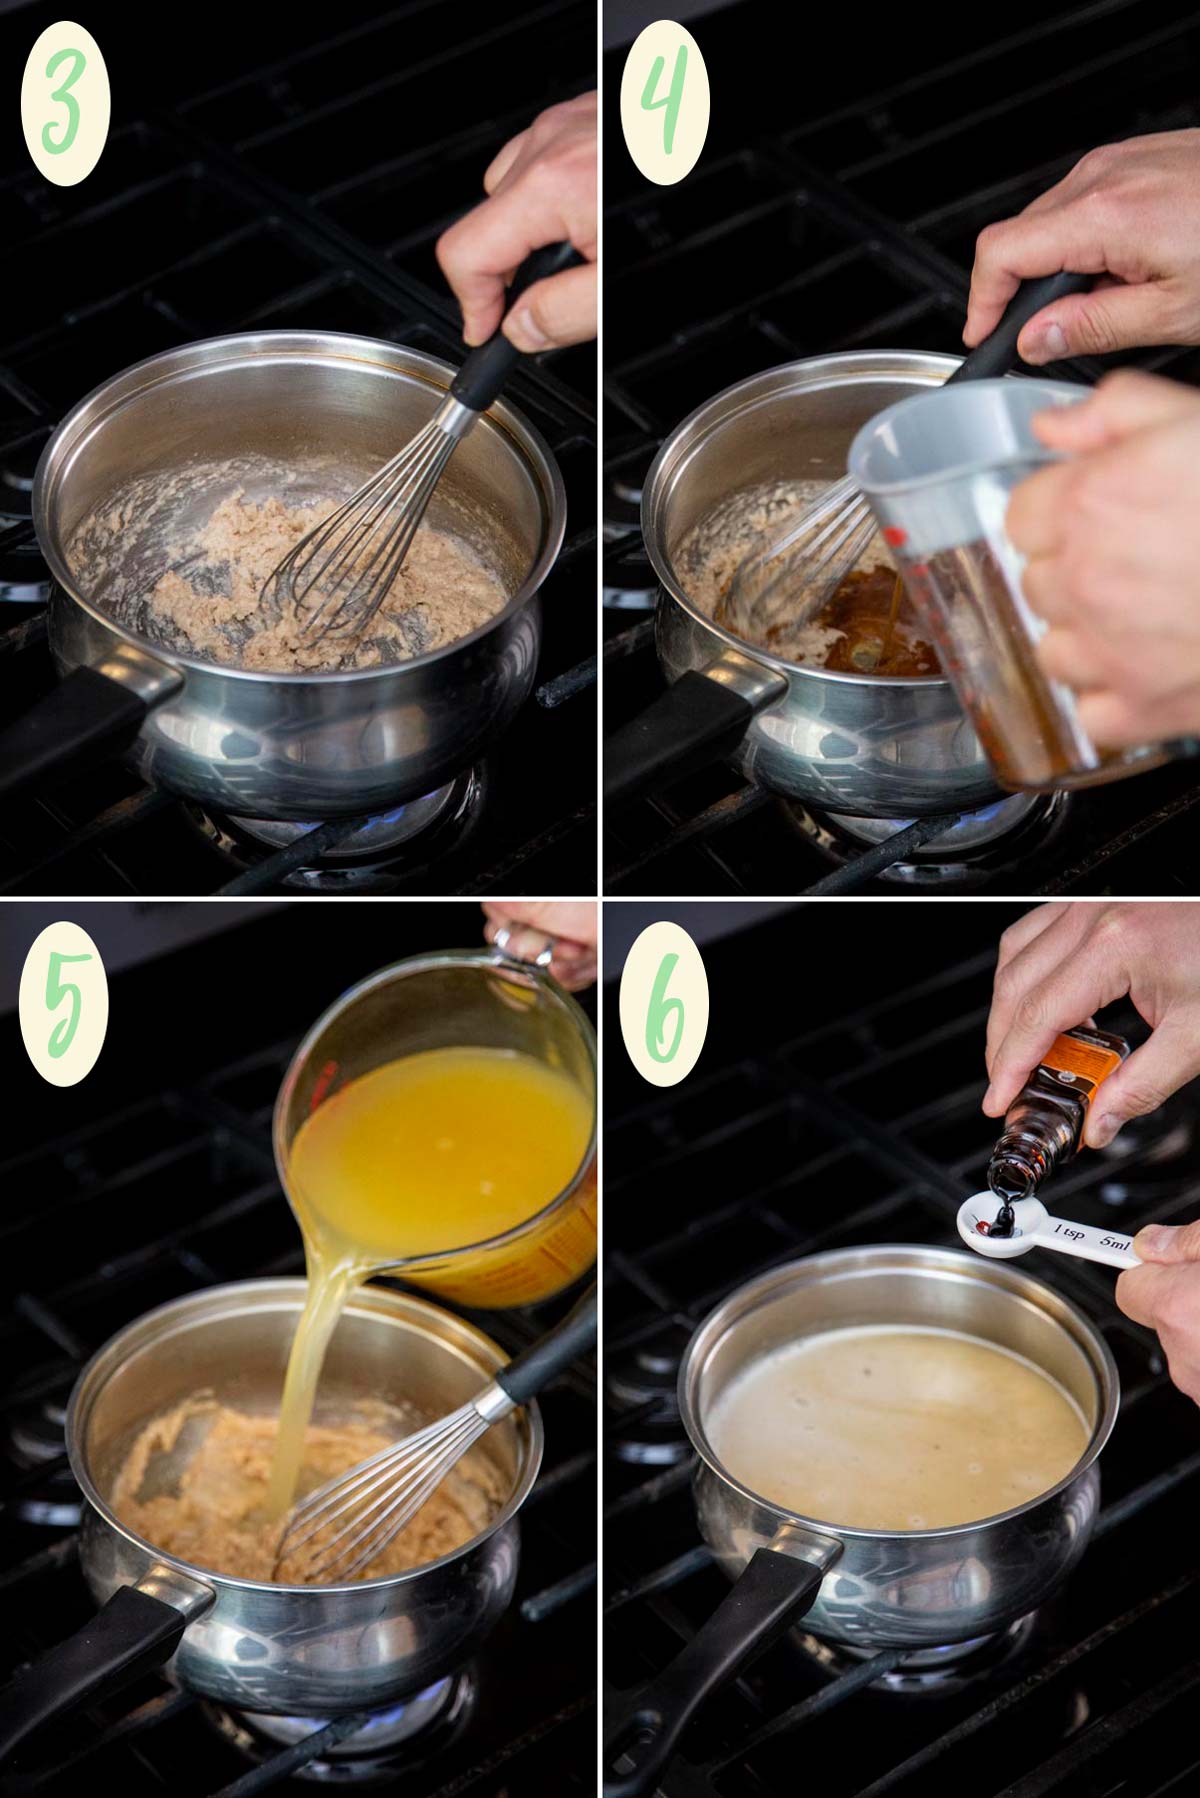 Collage of 4 photos showing how to make the turkey gravy